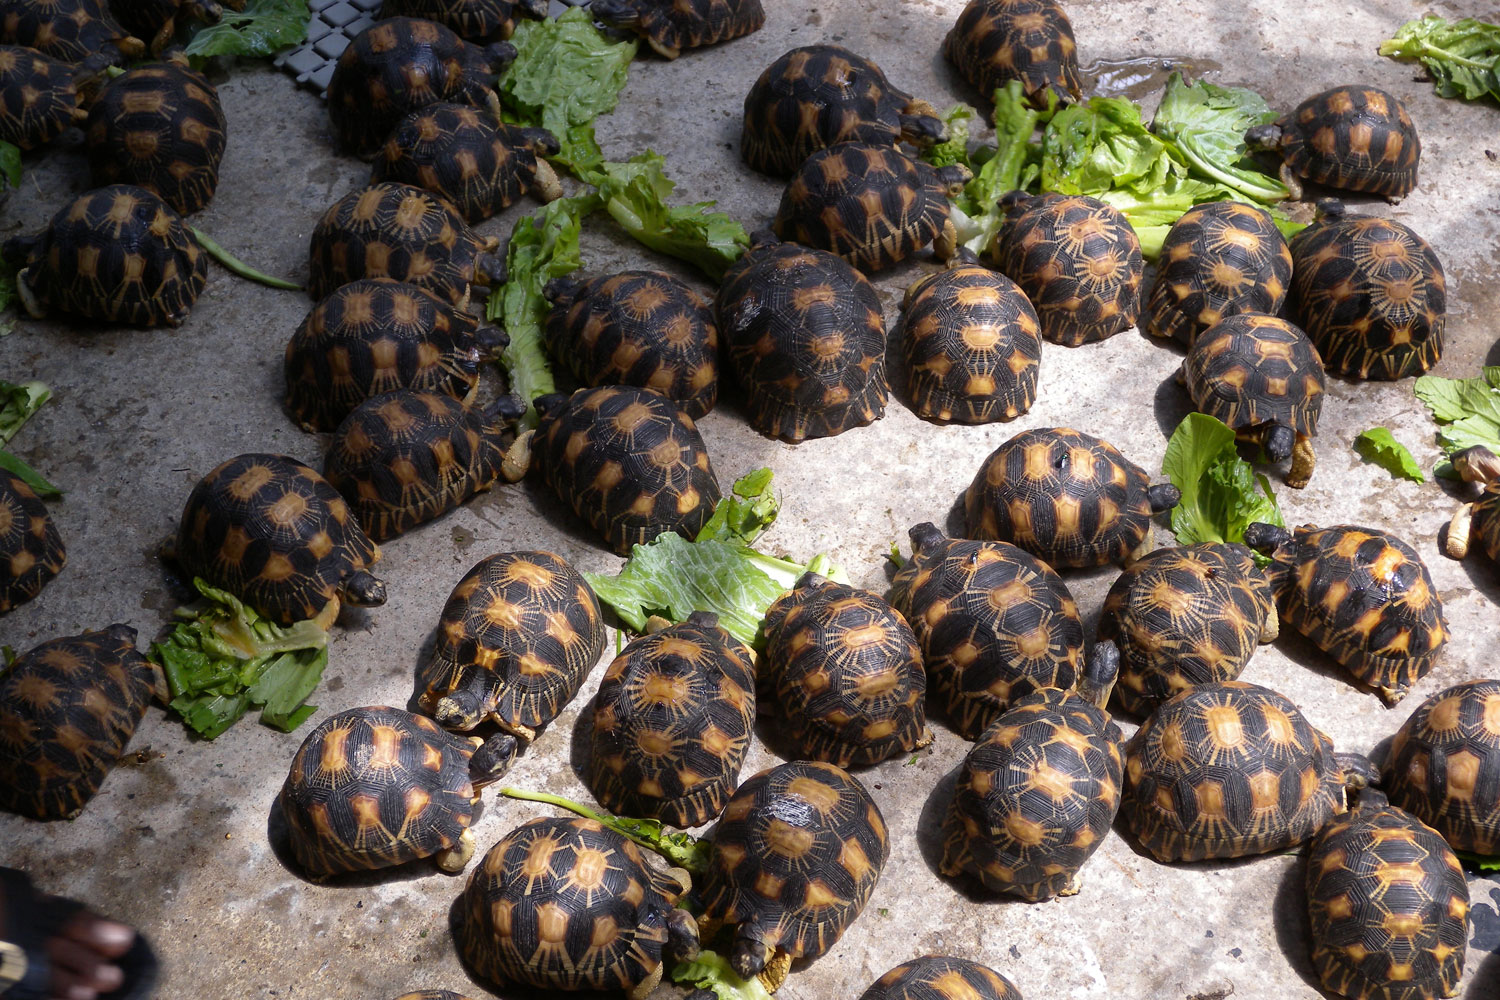 Radiated tortoises seized in Malaysia, July 28, 2011. Police in Madagascar arrested two men attempting to smuggle out nearly 200 threatened tortoises, including two dozen of the rarest species on Earth. The 26 specimens of Ploughshare tortoise (Astrochelys yniphora) seized comprise about five percent of the estimated surviving wild population of the critically endangered animal, native to northern Madagascar. Border police also found 169 Radiated tortoises (Asstrochelys radiata) and one Spider tortoise (Pyxis arachnoides), prized by collectors internationally.